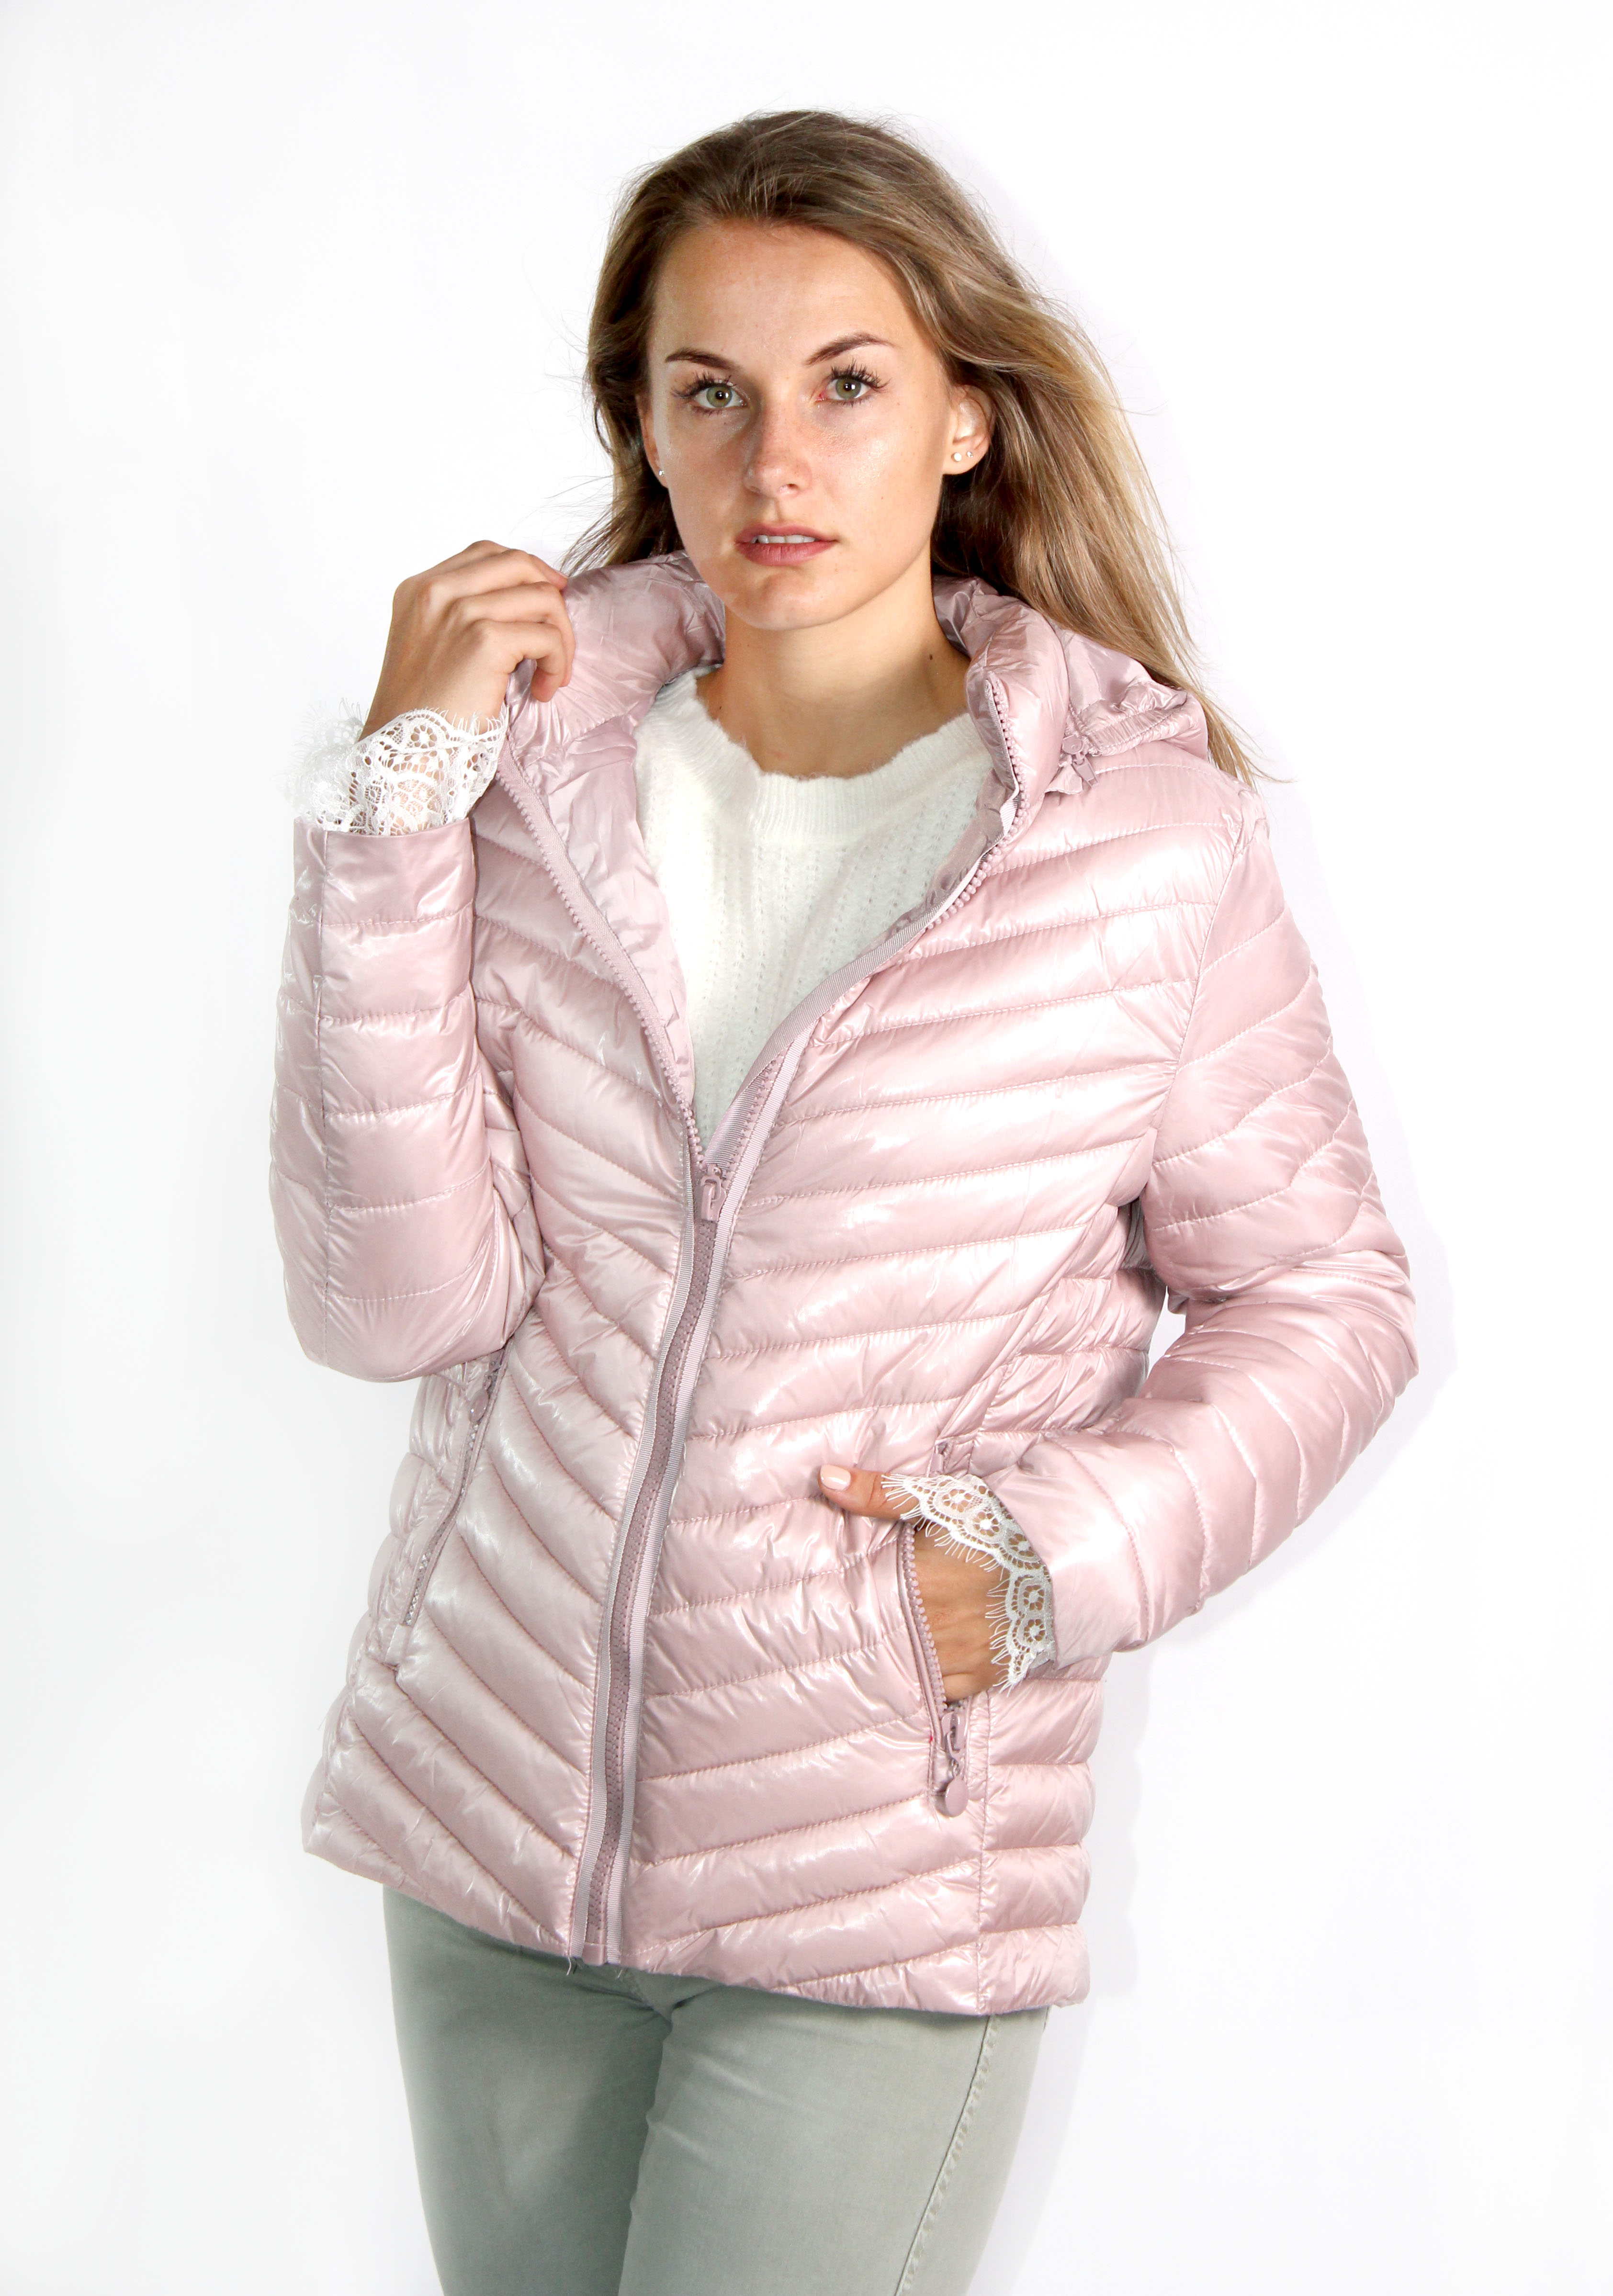 MADE IN ITALY PINK PUFFER JACKET | Rosella - Style inspired by elegance